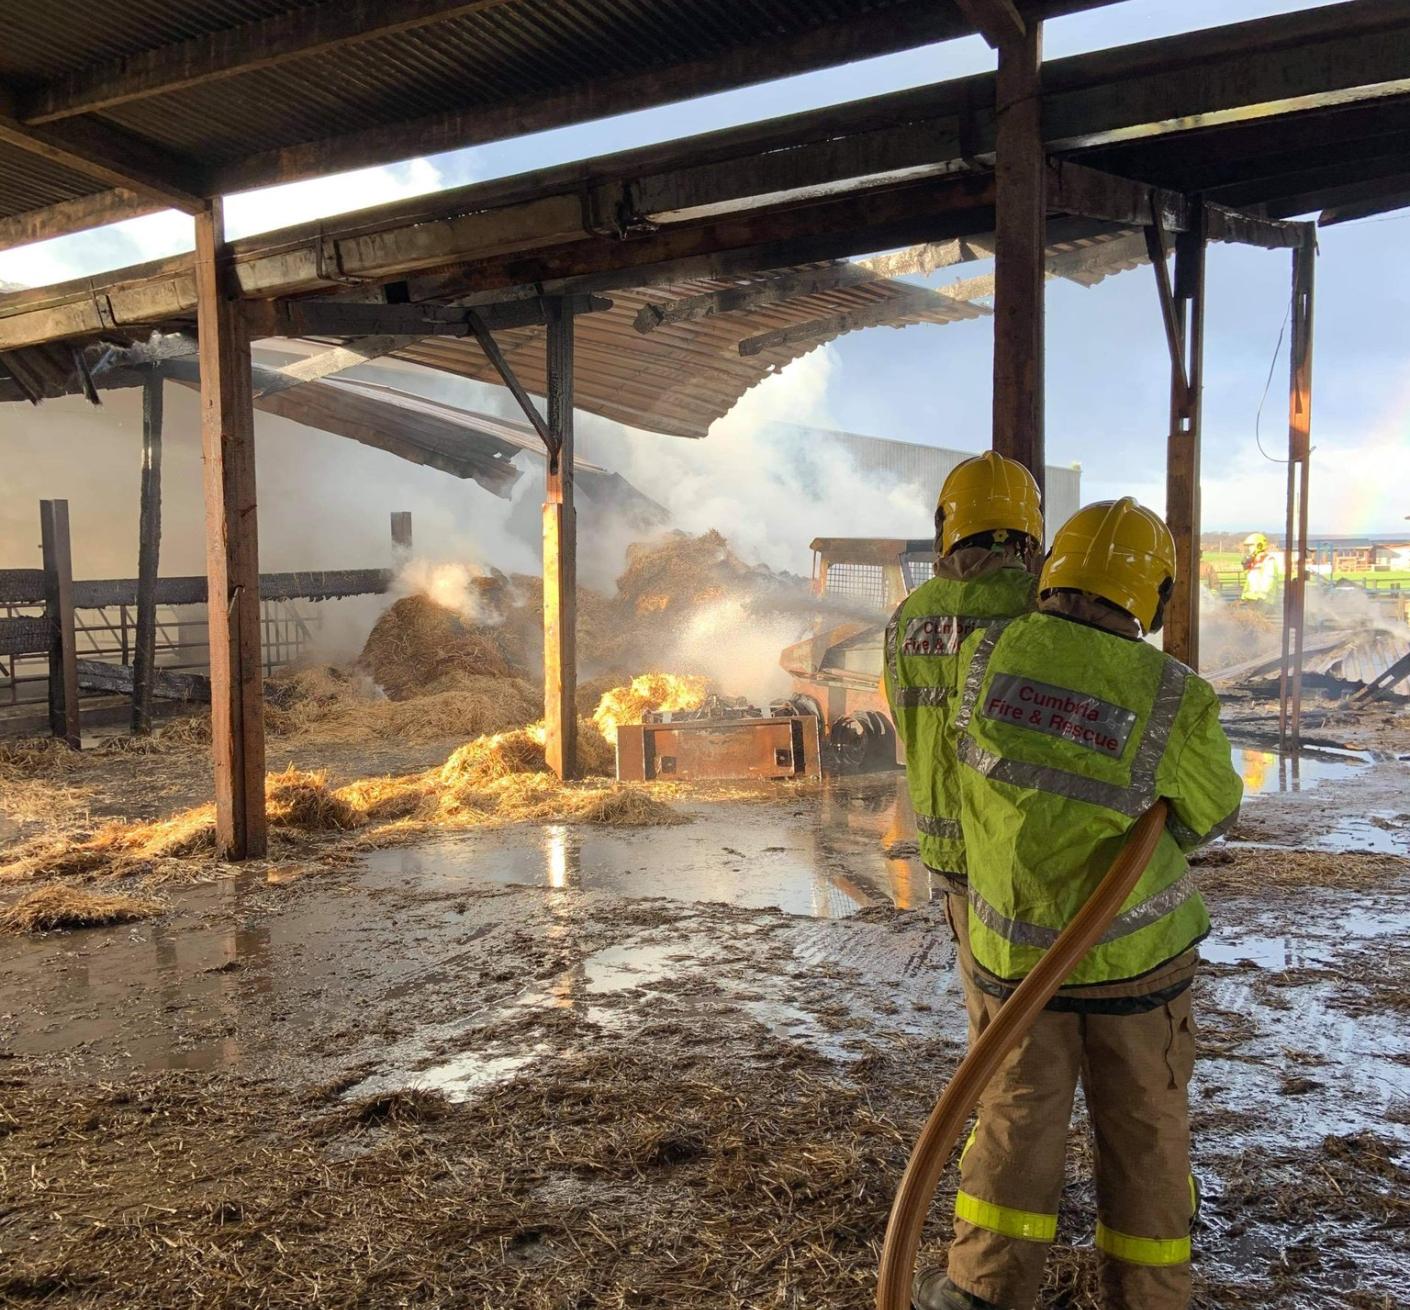 Two firefighters from Cumbria Fire and Rescue Service douse hay bales with water at a previous incident